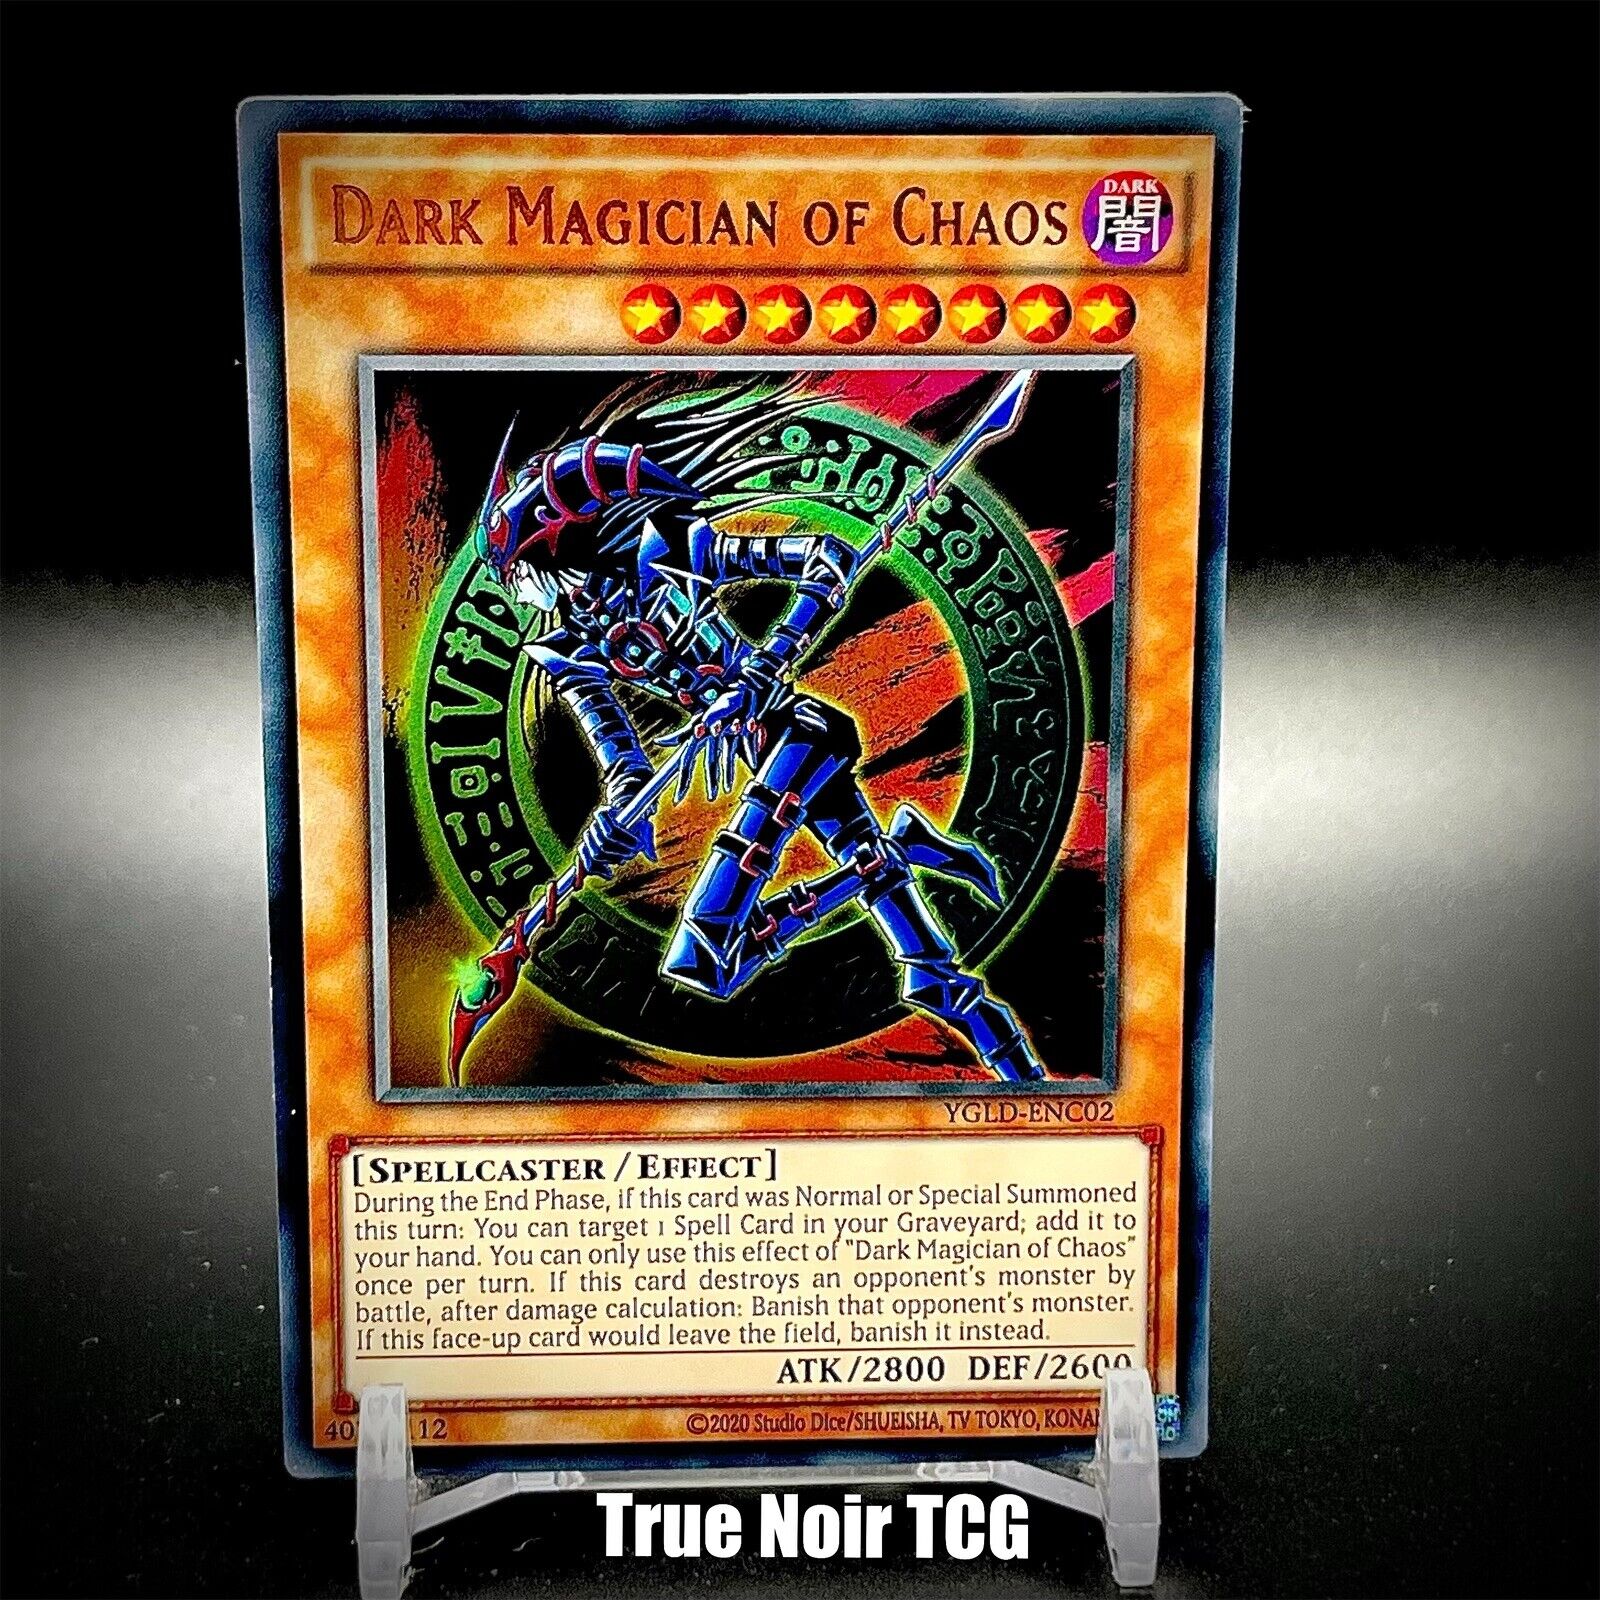 Dark Magician of Chaos YGLD-ENC02 Ultra Rare Unlimited Edition (VLP)